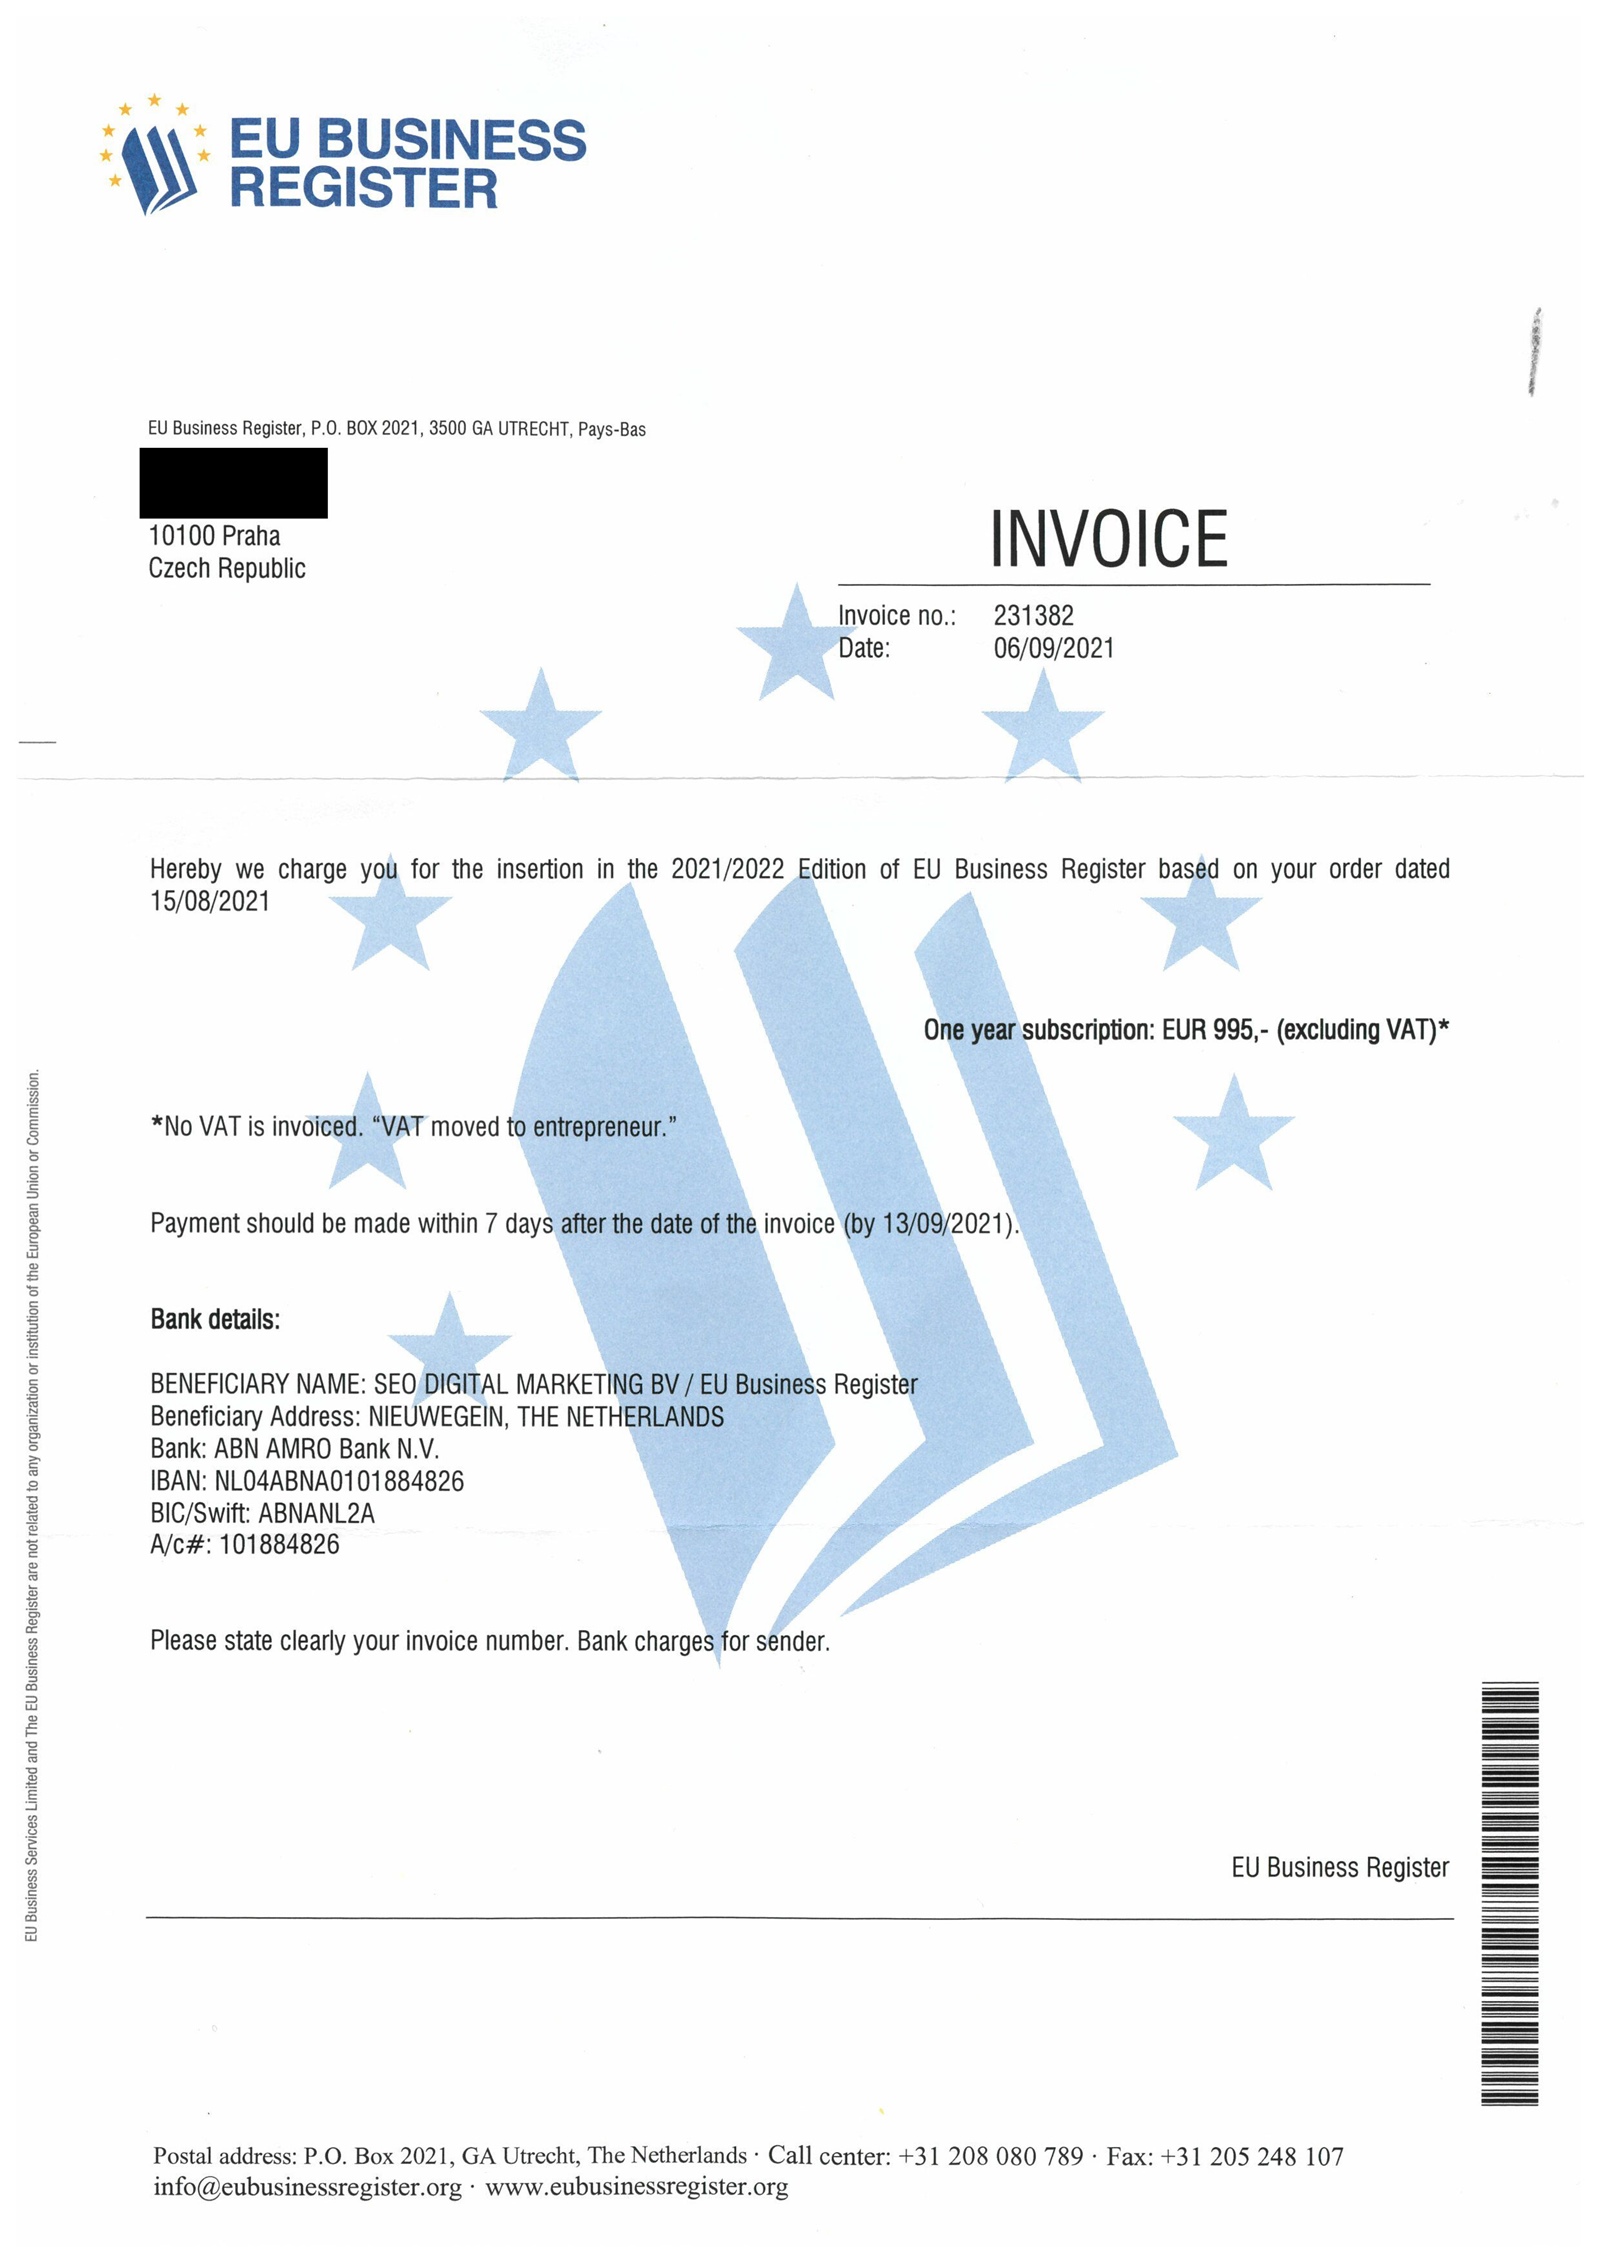 “EU Business Register” spam: what happens if you do not pay